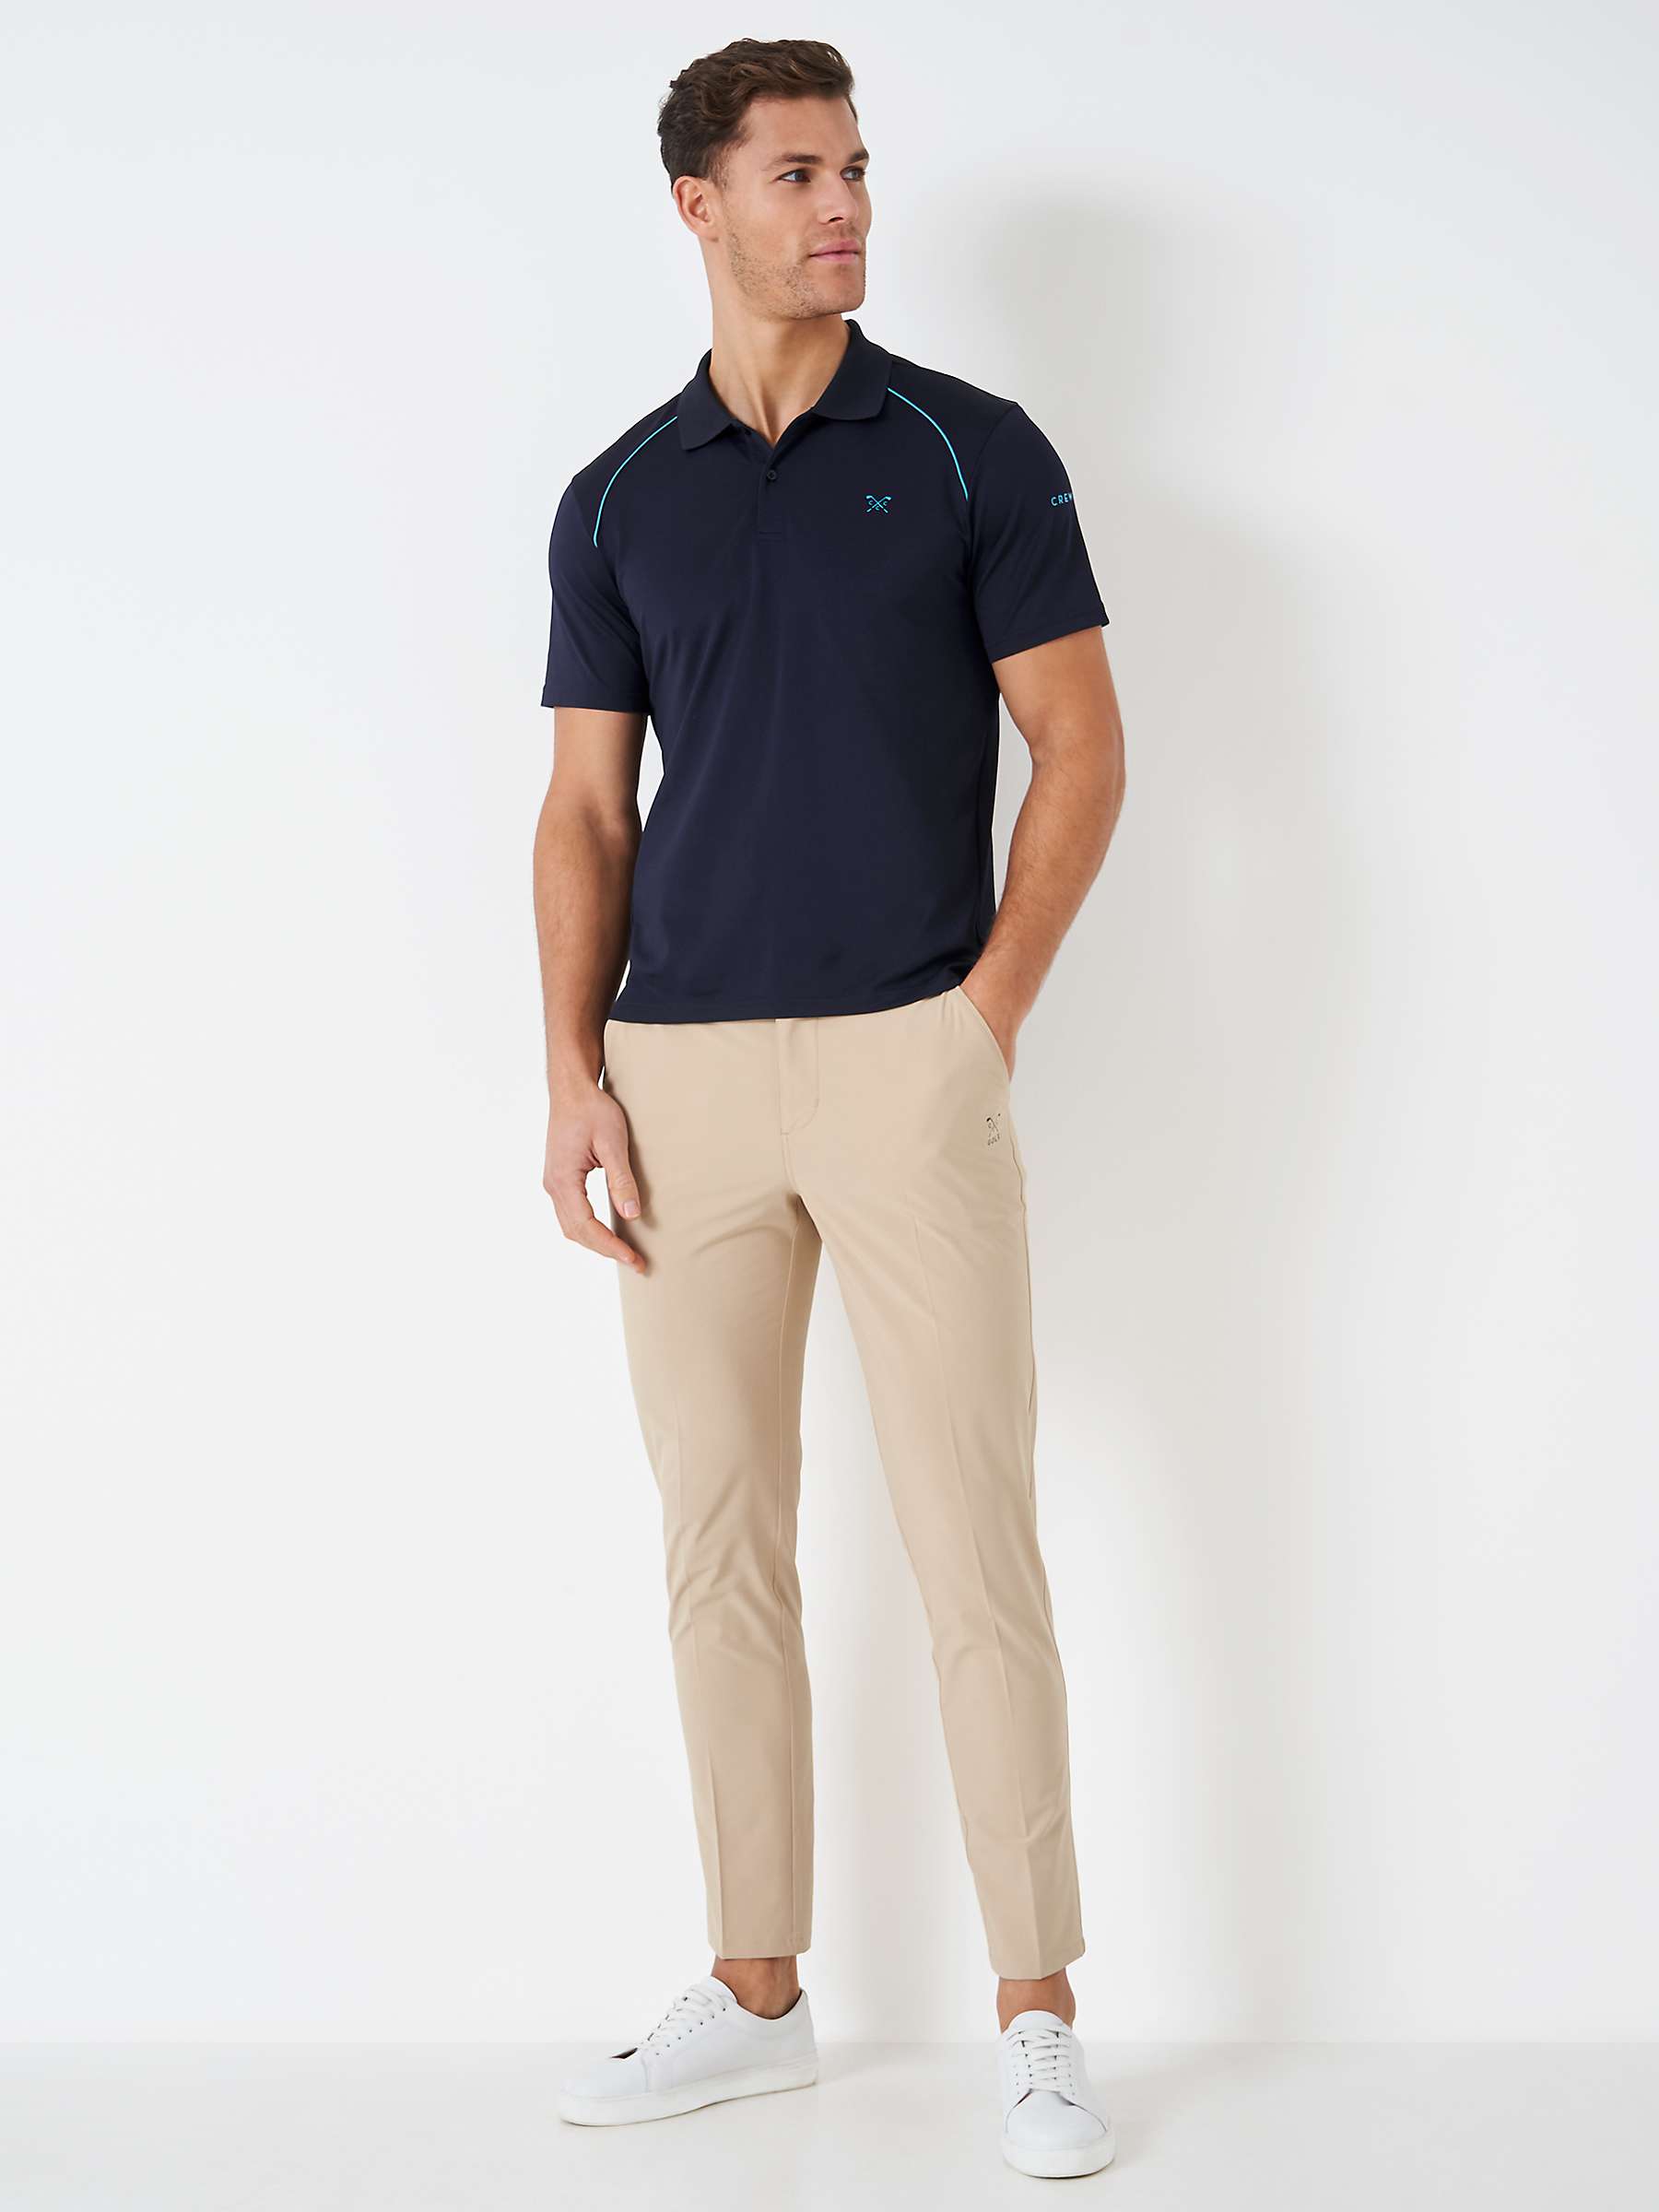 Crew Clothing Stretch Pique Golf Polo Top, Navy Blue at John Lewis ...